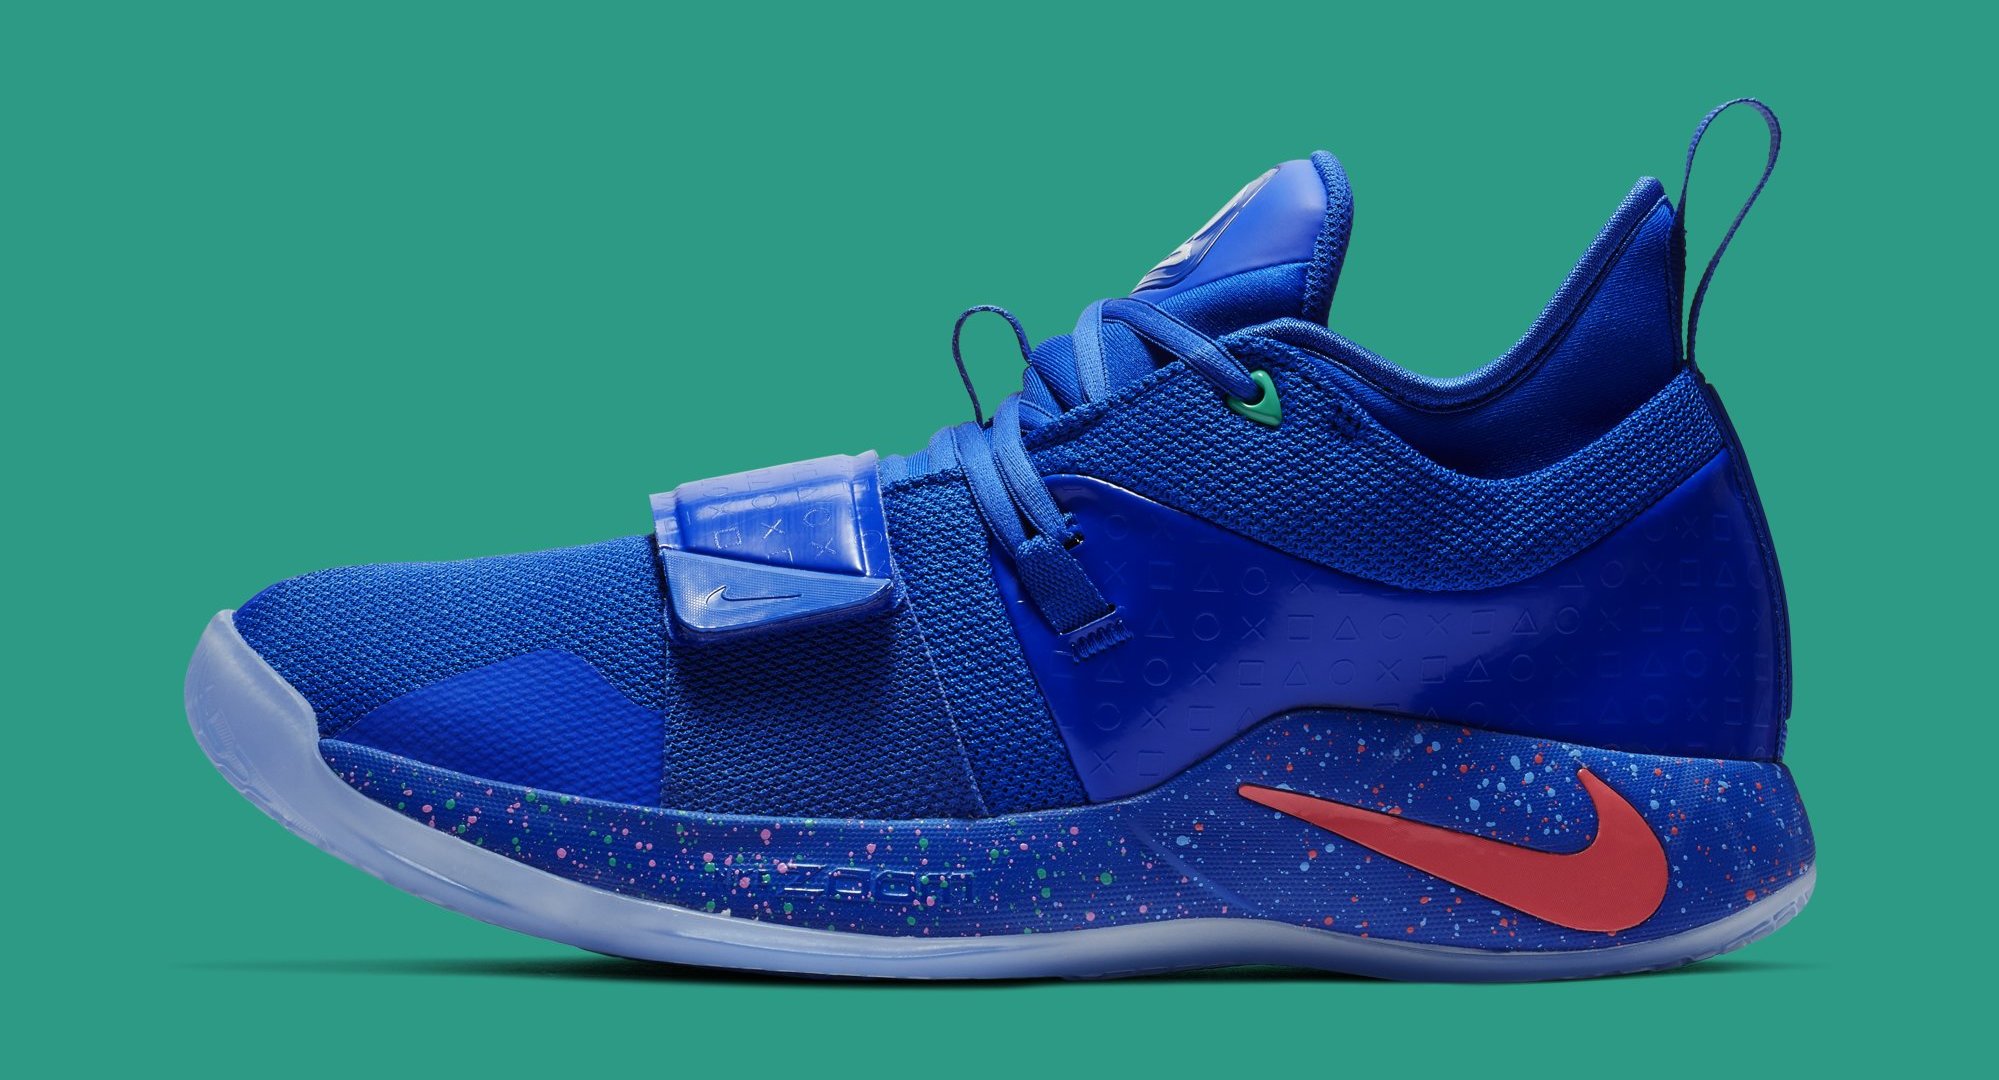 Playstation x Nike PG 2.5 &#x27;Blue/Multi Color&#x27; BQ8388 900 (Lateral)